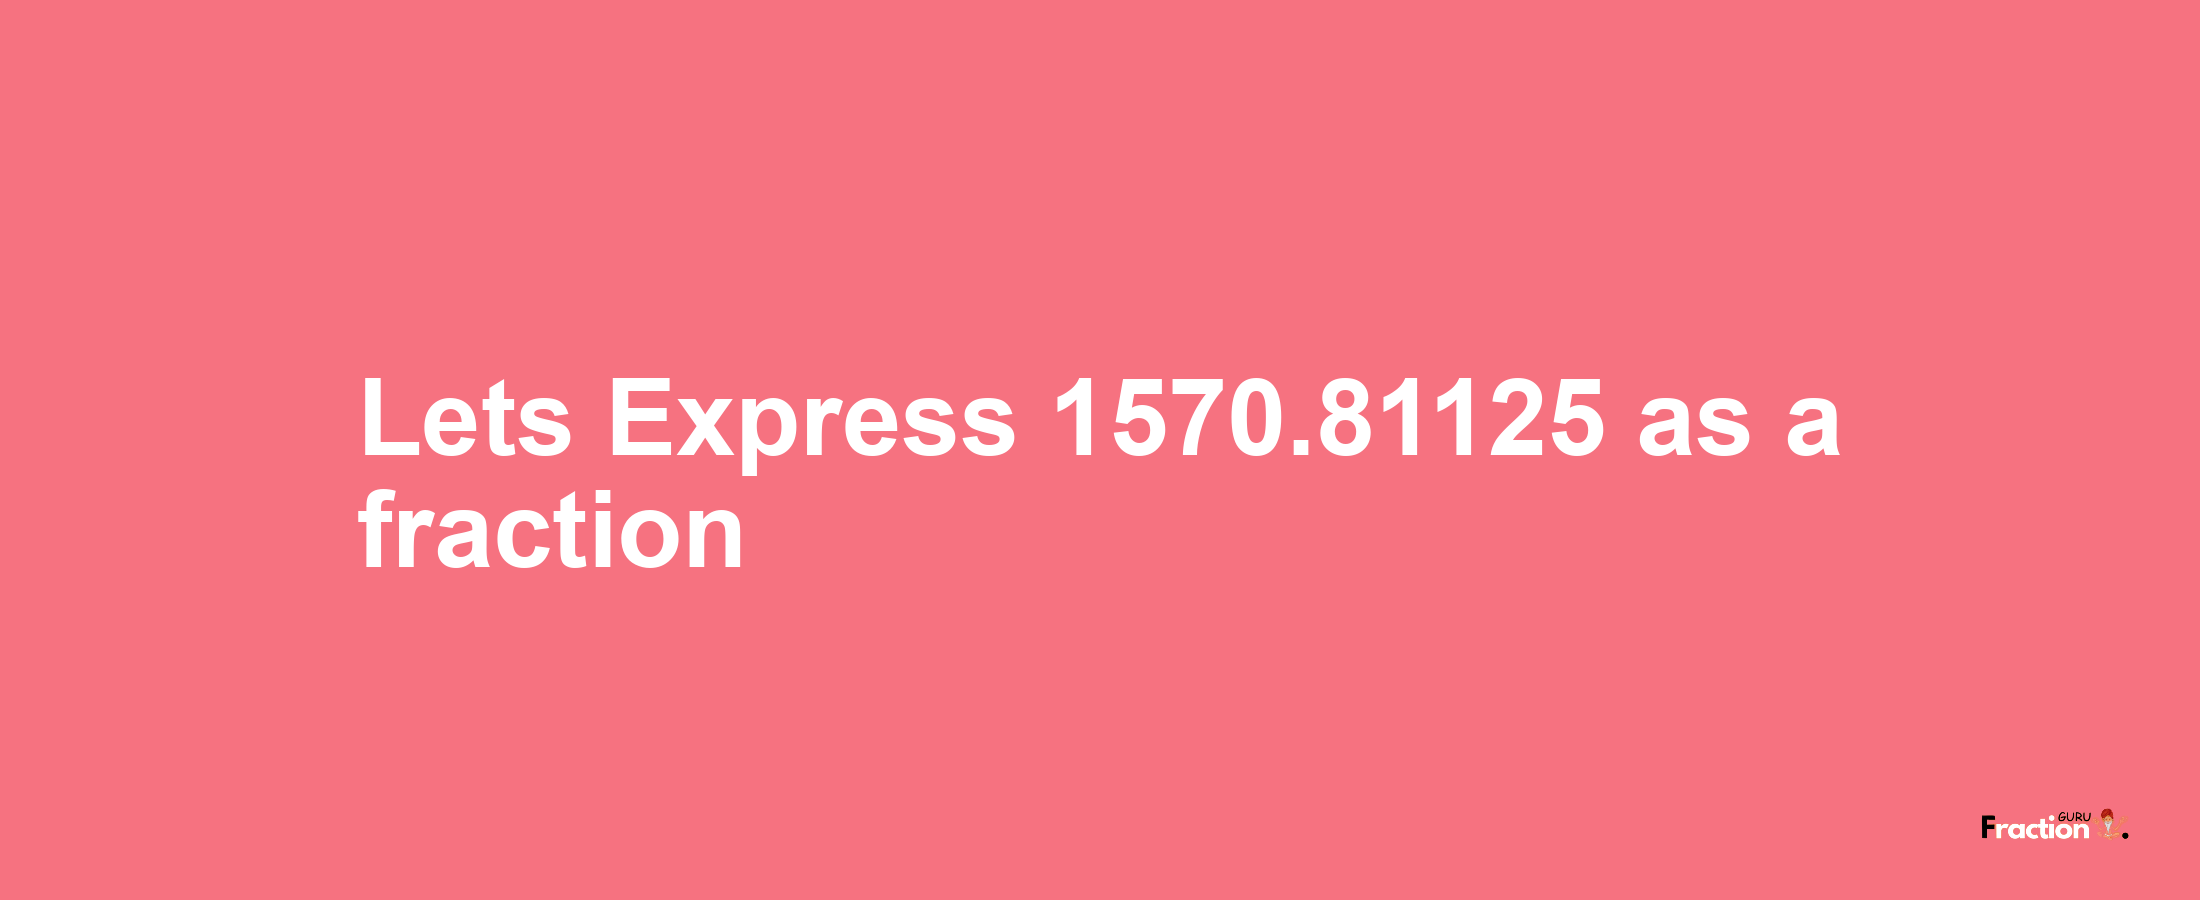 Lets Express 1570.81125 as afraction